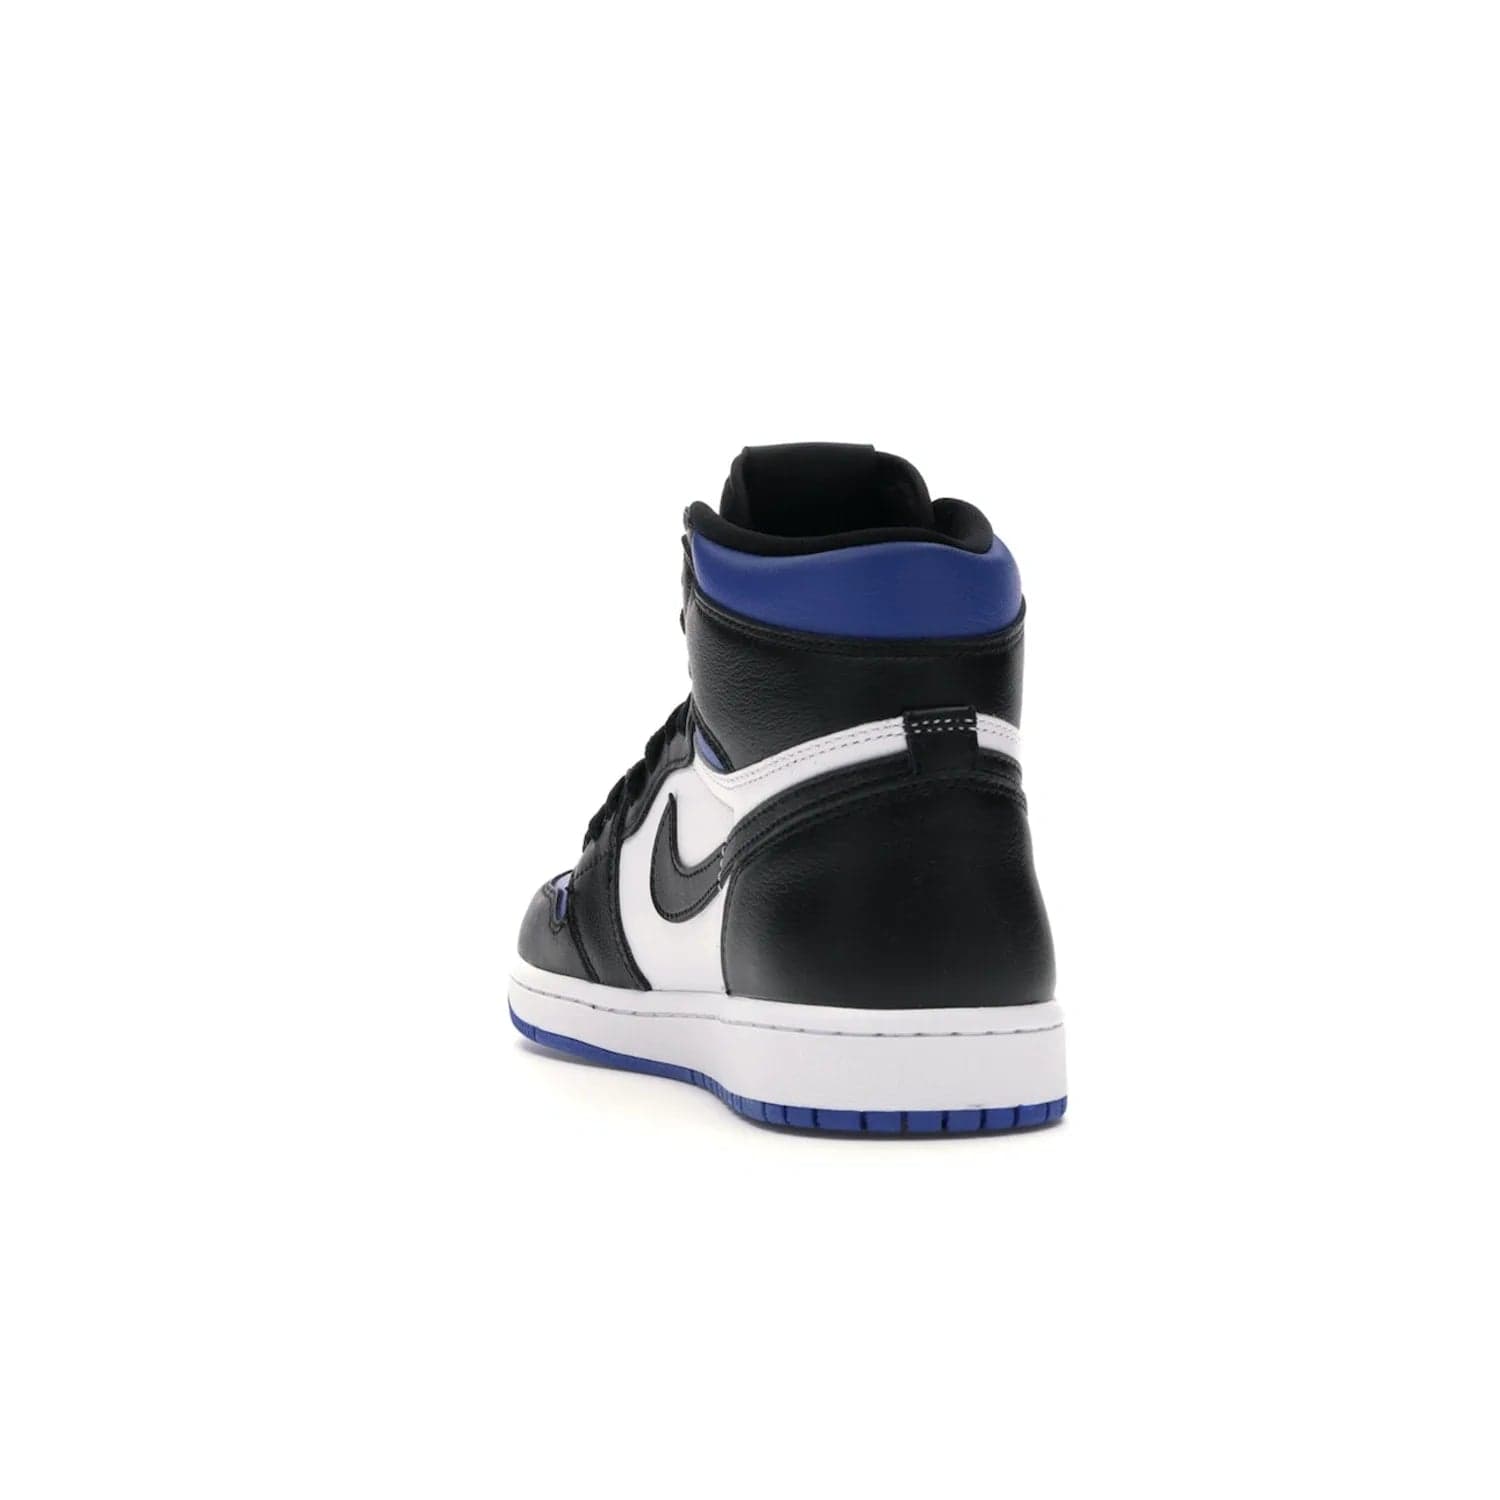 Jordan 1 Retro High Royal Toe - Image 26 - Only at www.BallersClubKickz.com - Refresh your look with the Jordan 1 Retro High Royal Toe. This classic AJ 1 sports a white and royal leather upper, black leather overlays, and branded leather tongue tag. Pick up today and set the streets ablaze.